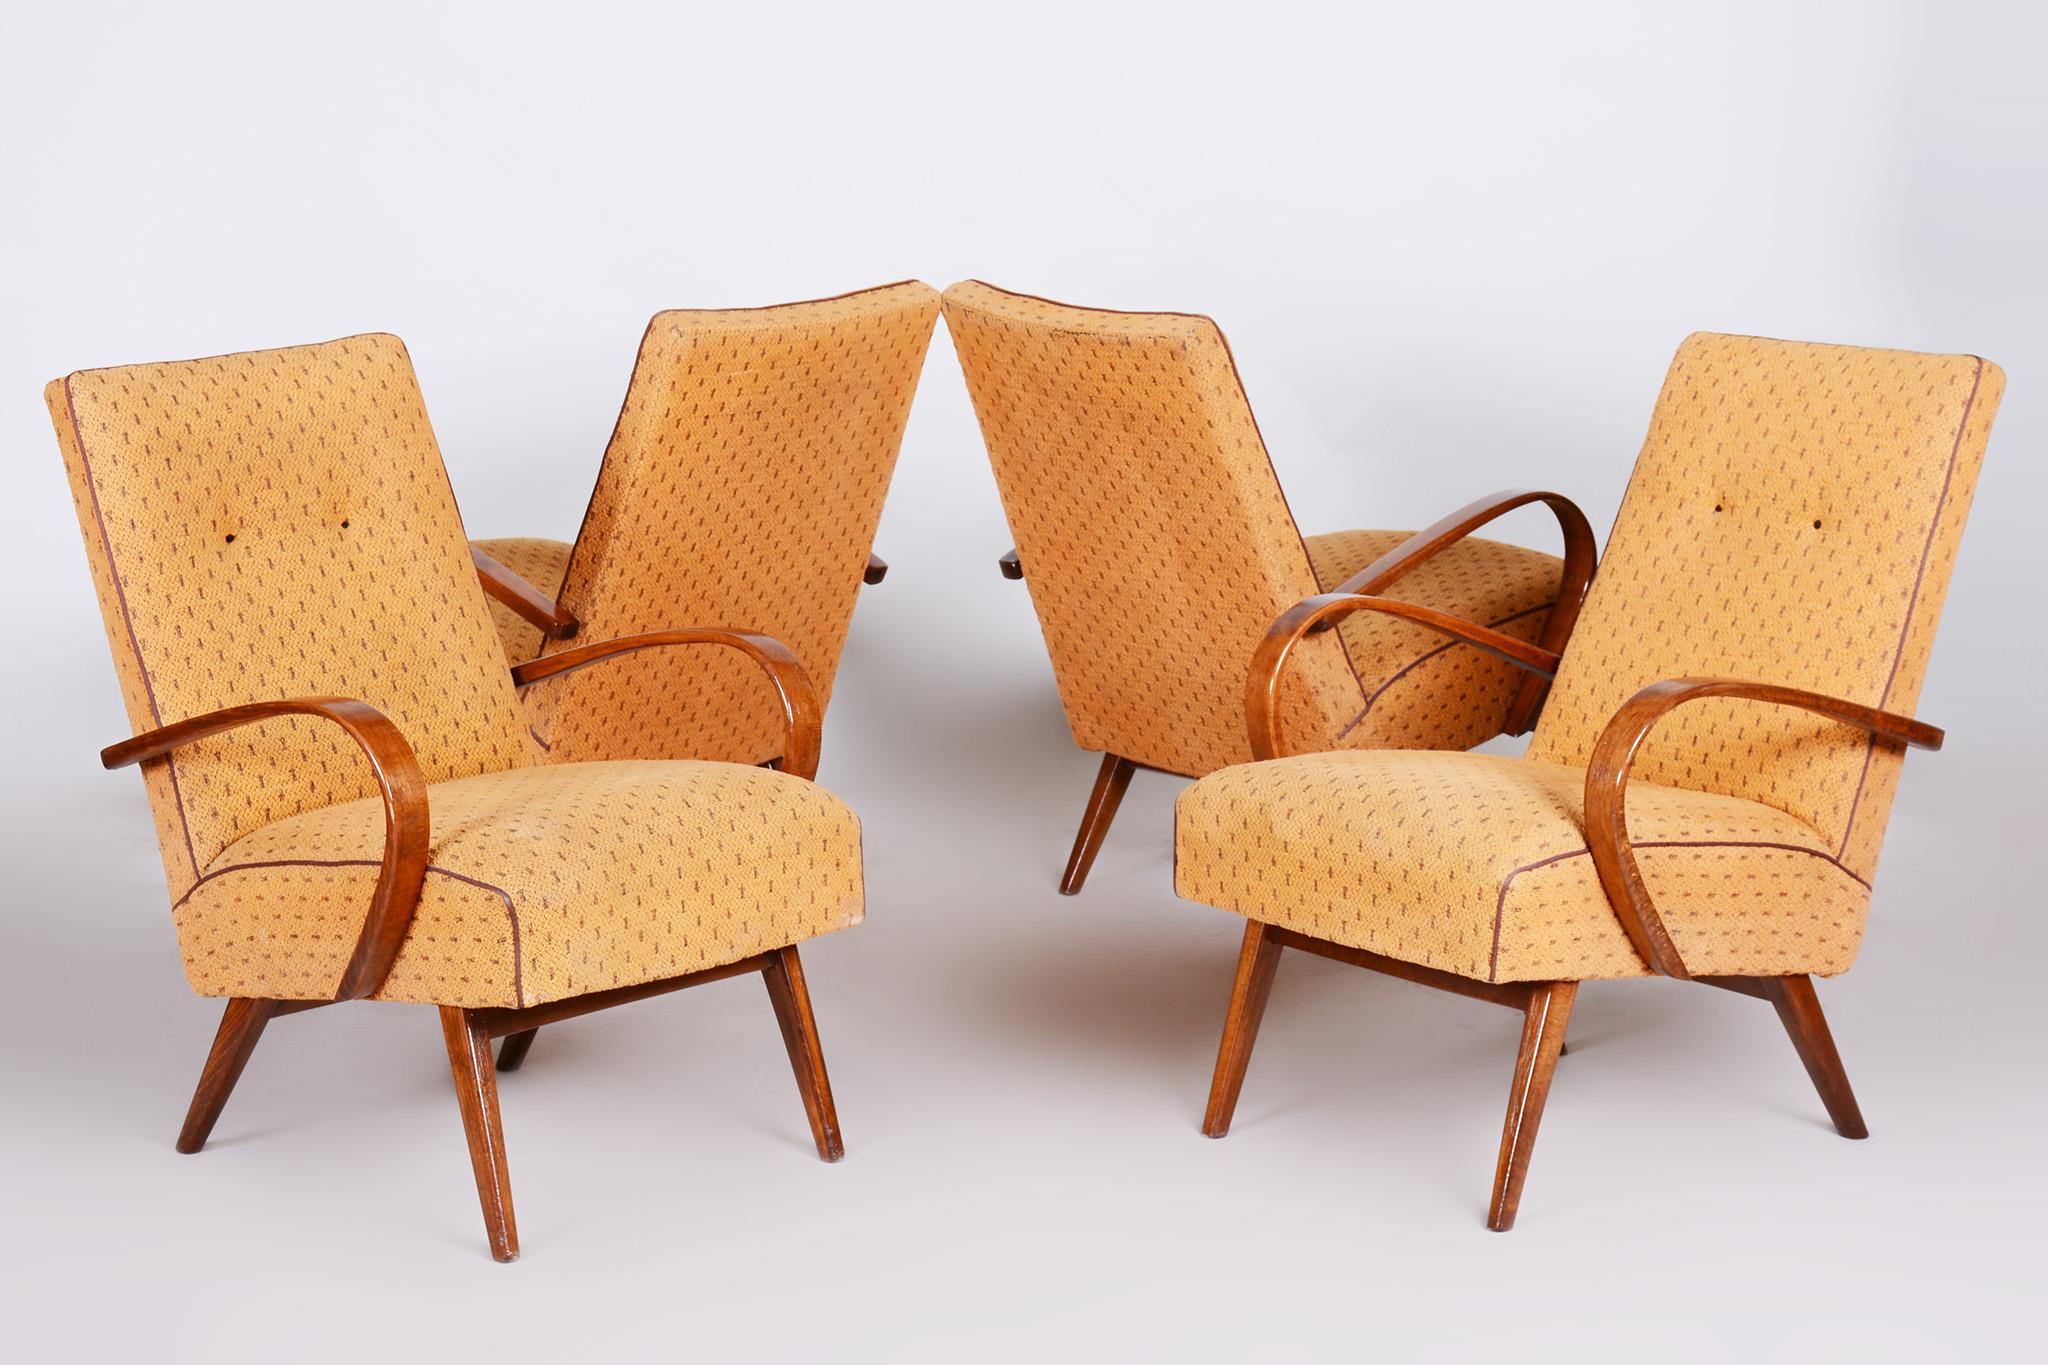 Four Yellow Mid Century Armchairs Made in 1950s Czechia, Original Condition For Sale 4